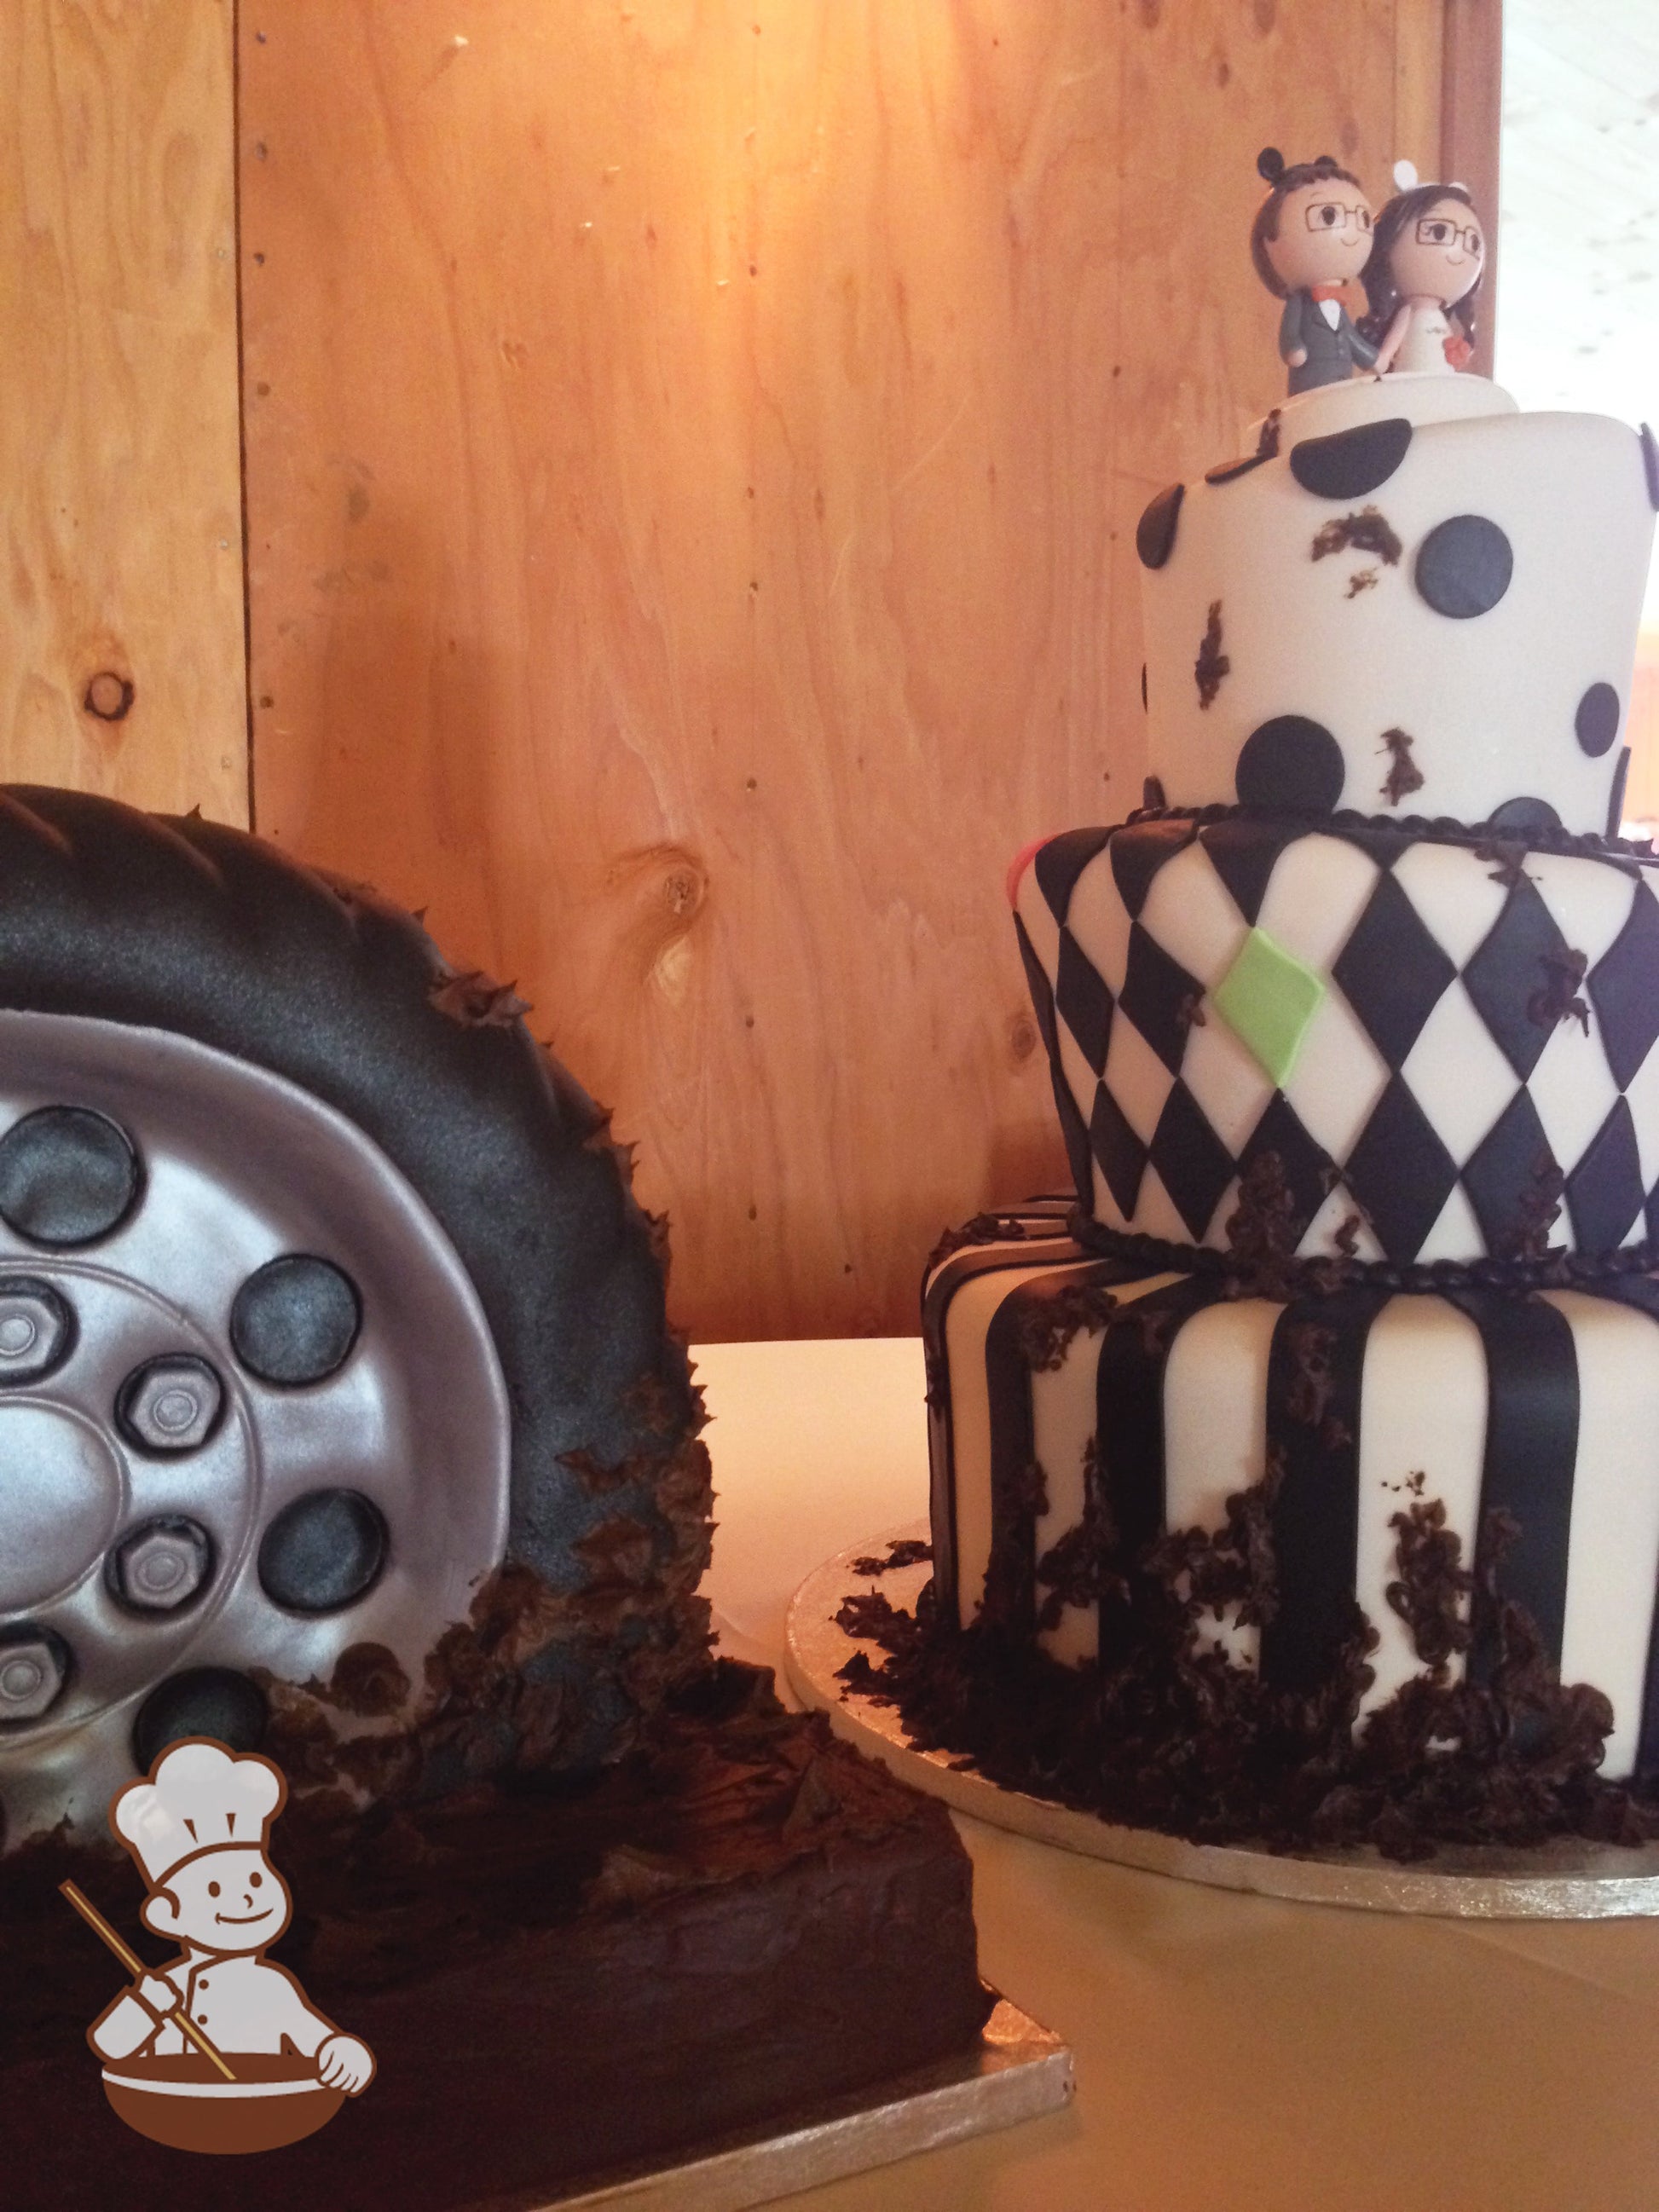 A tire shaped groom's cake is next to the main cake.